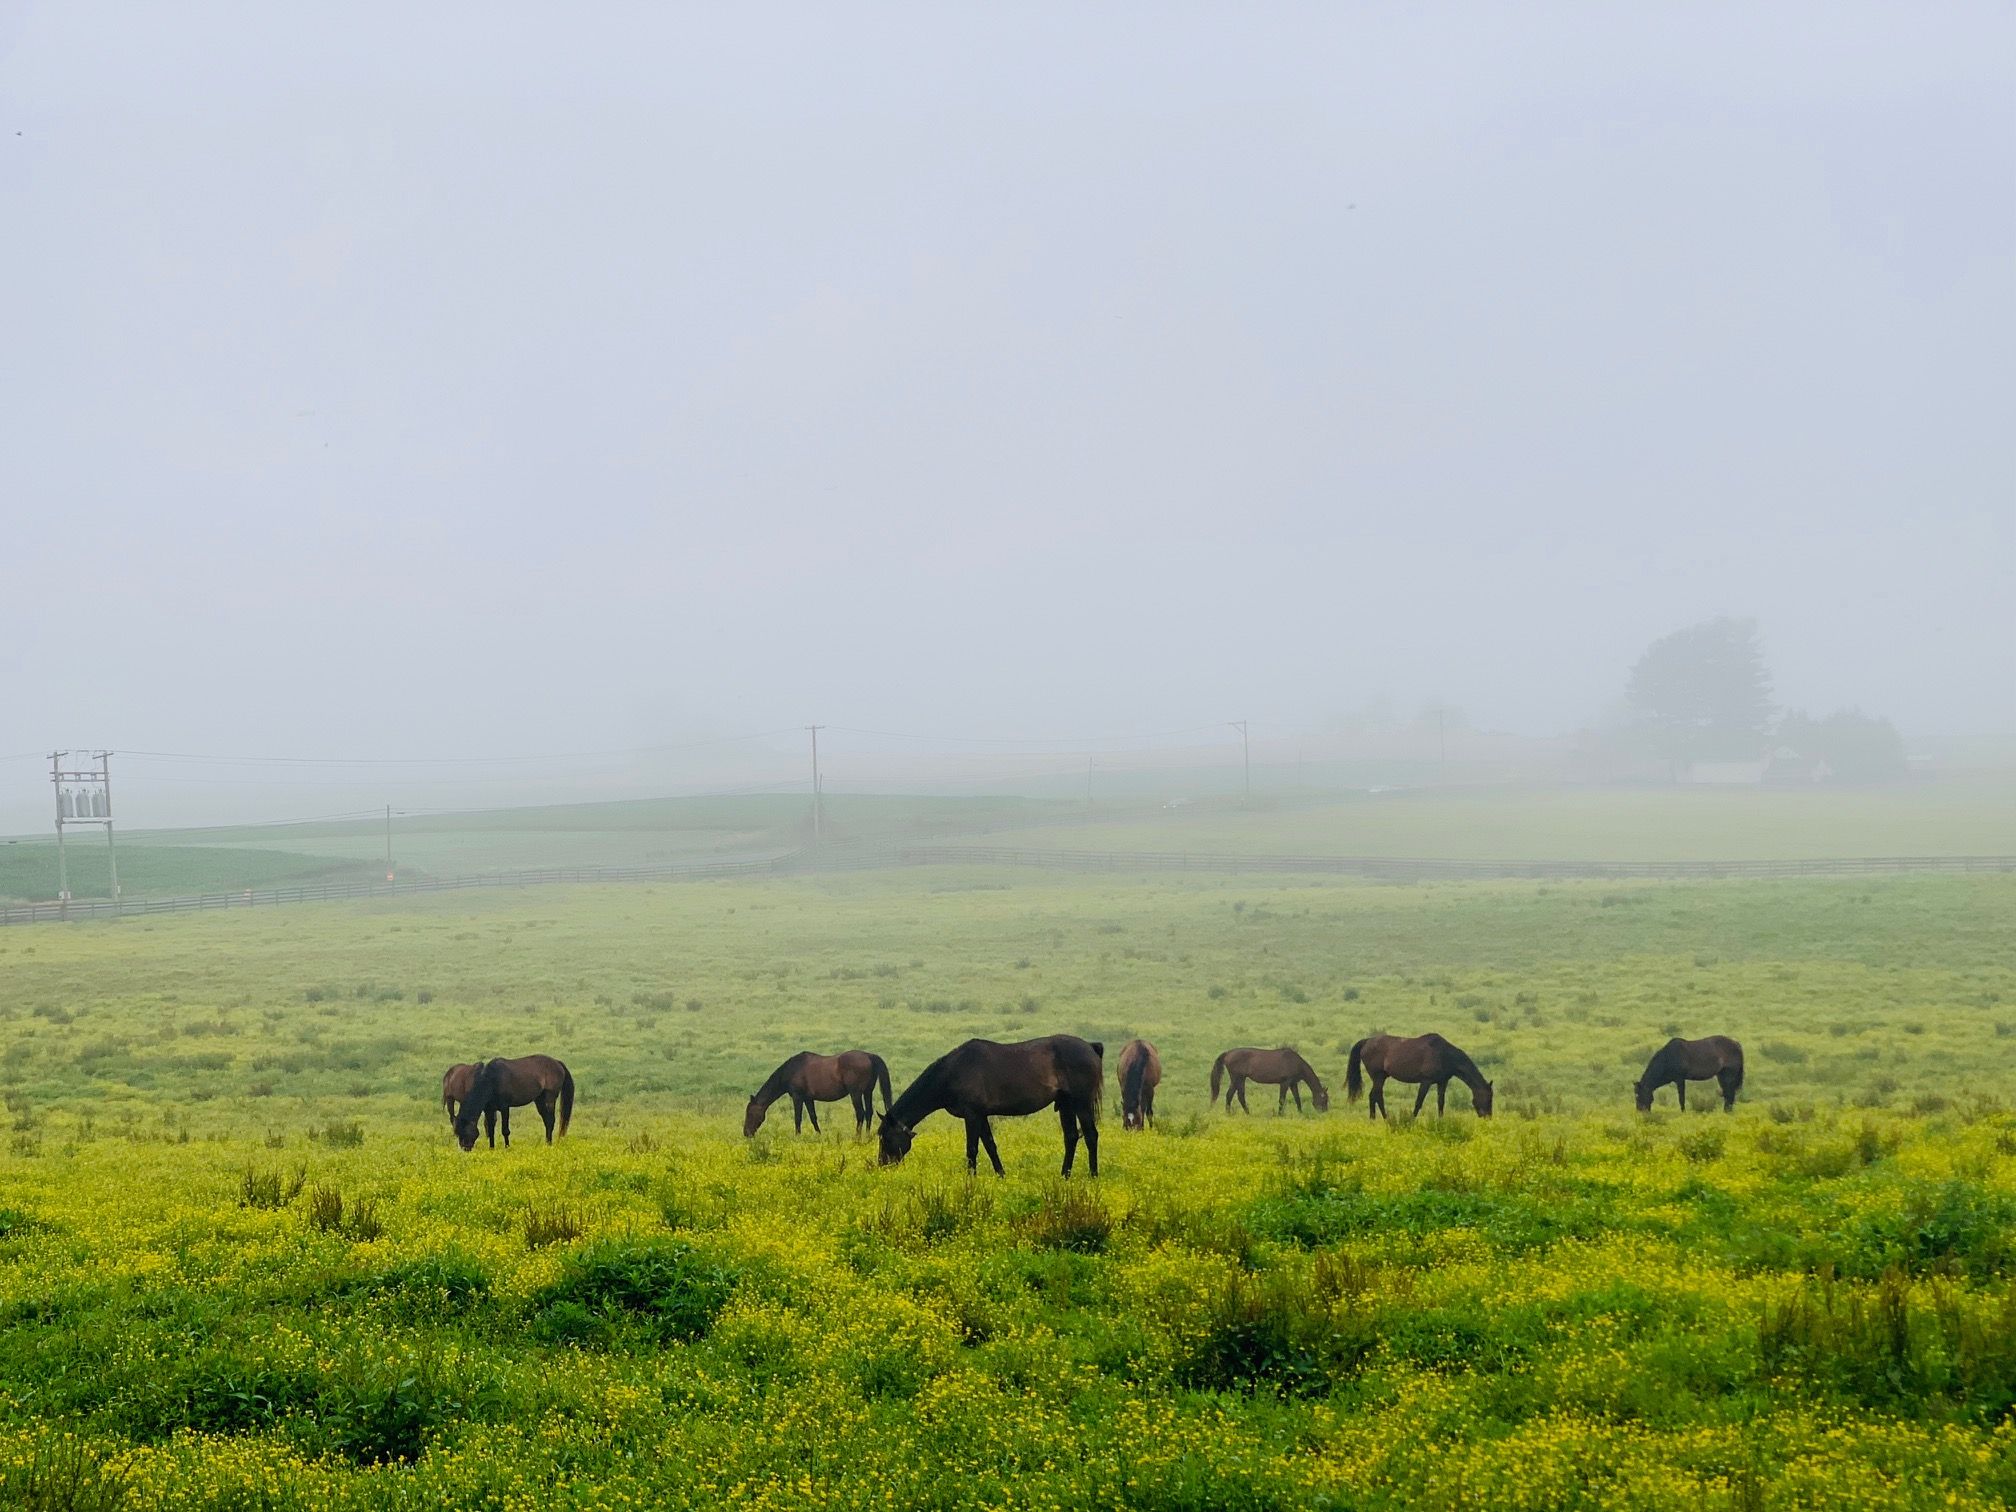 Some of our sanctuary geldings graze on a foggy morning.